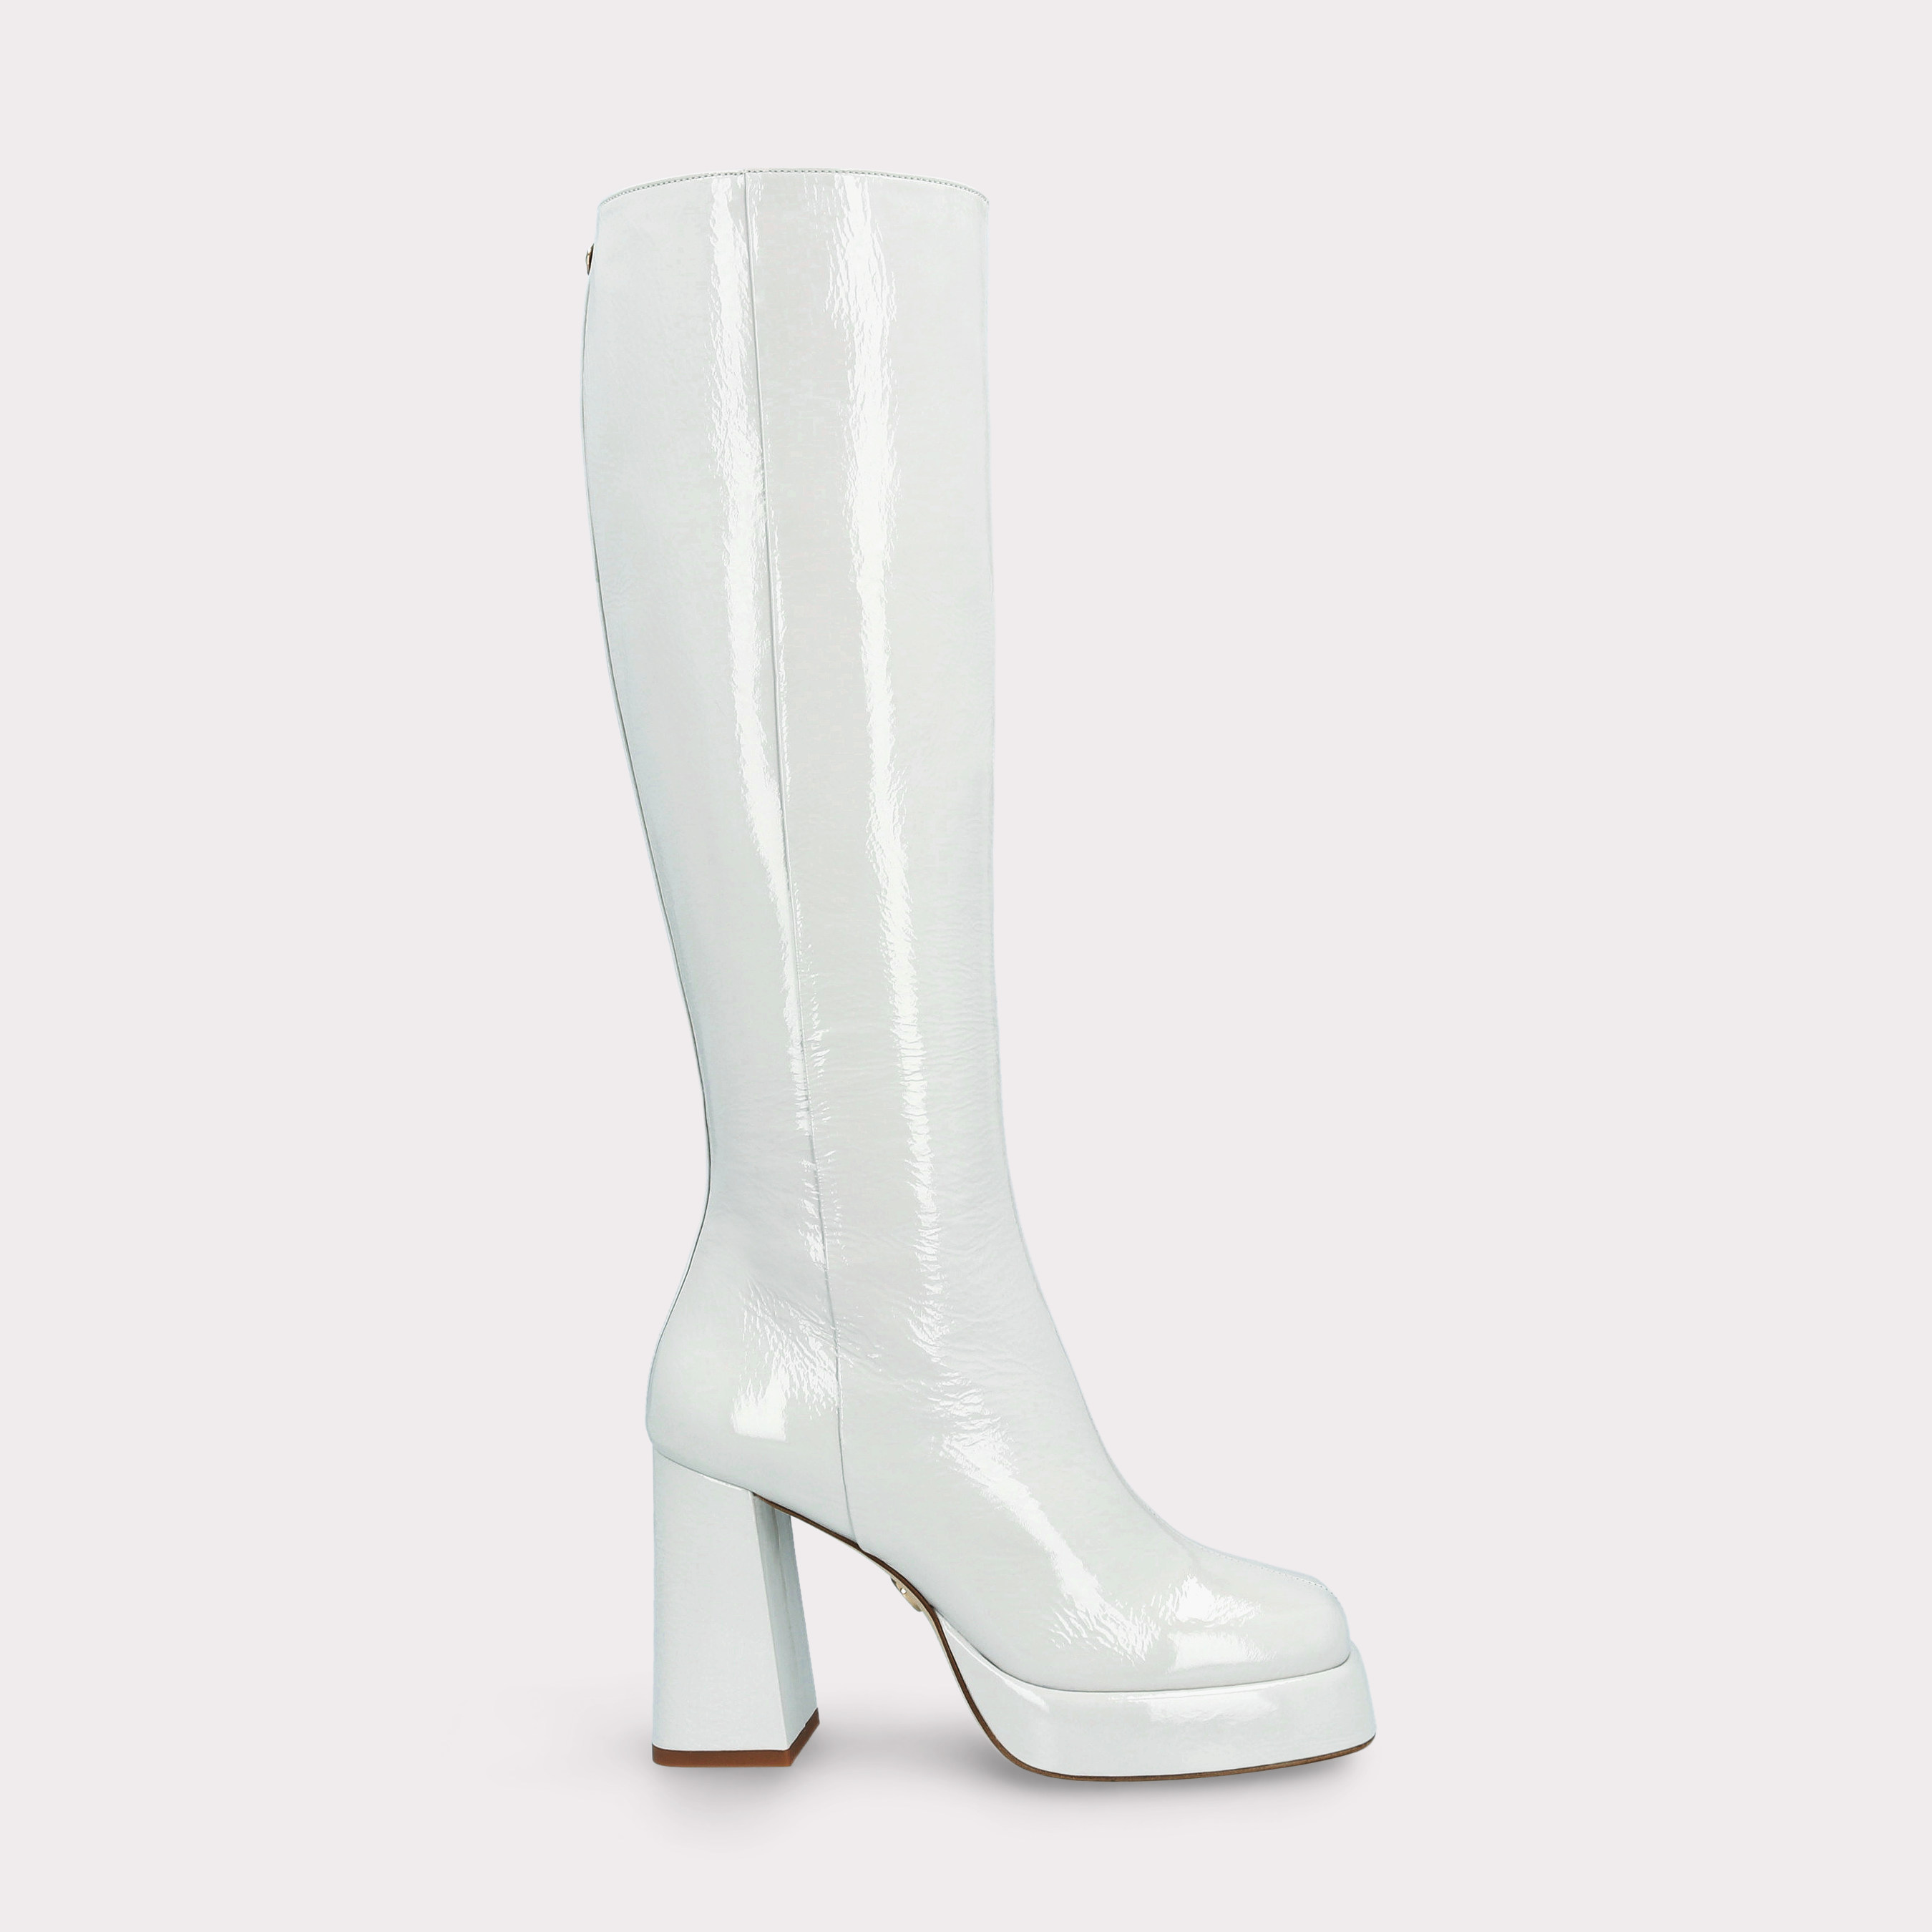 CINDY 01  STORM GRAY CRUSHED PATENT LEATHER PLATFORM BOOTS